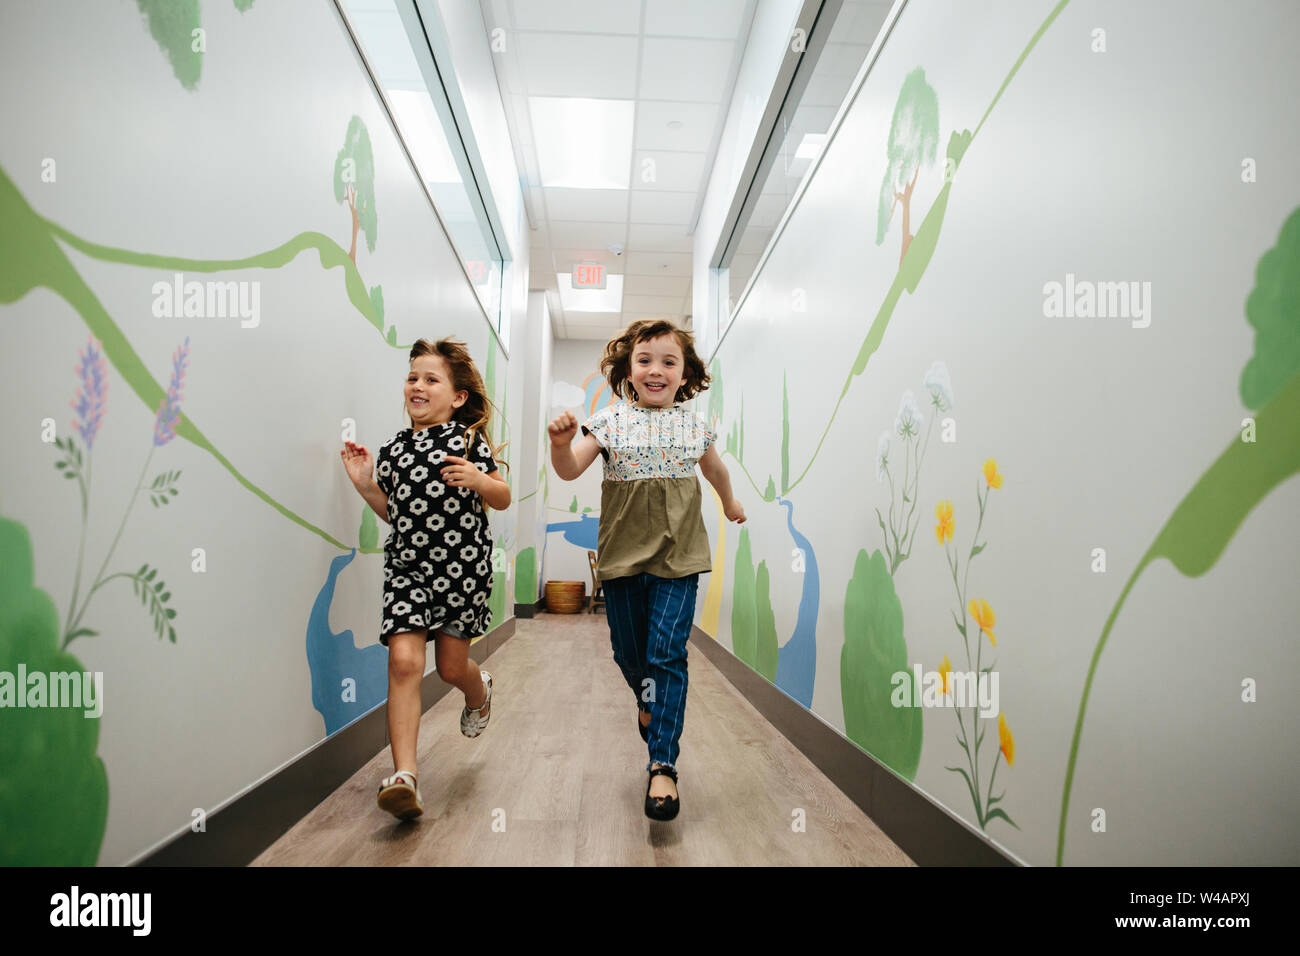 Two girls smile and run down a hallway in a school building Stock Photo